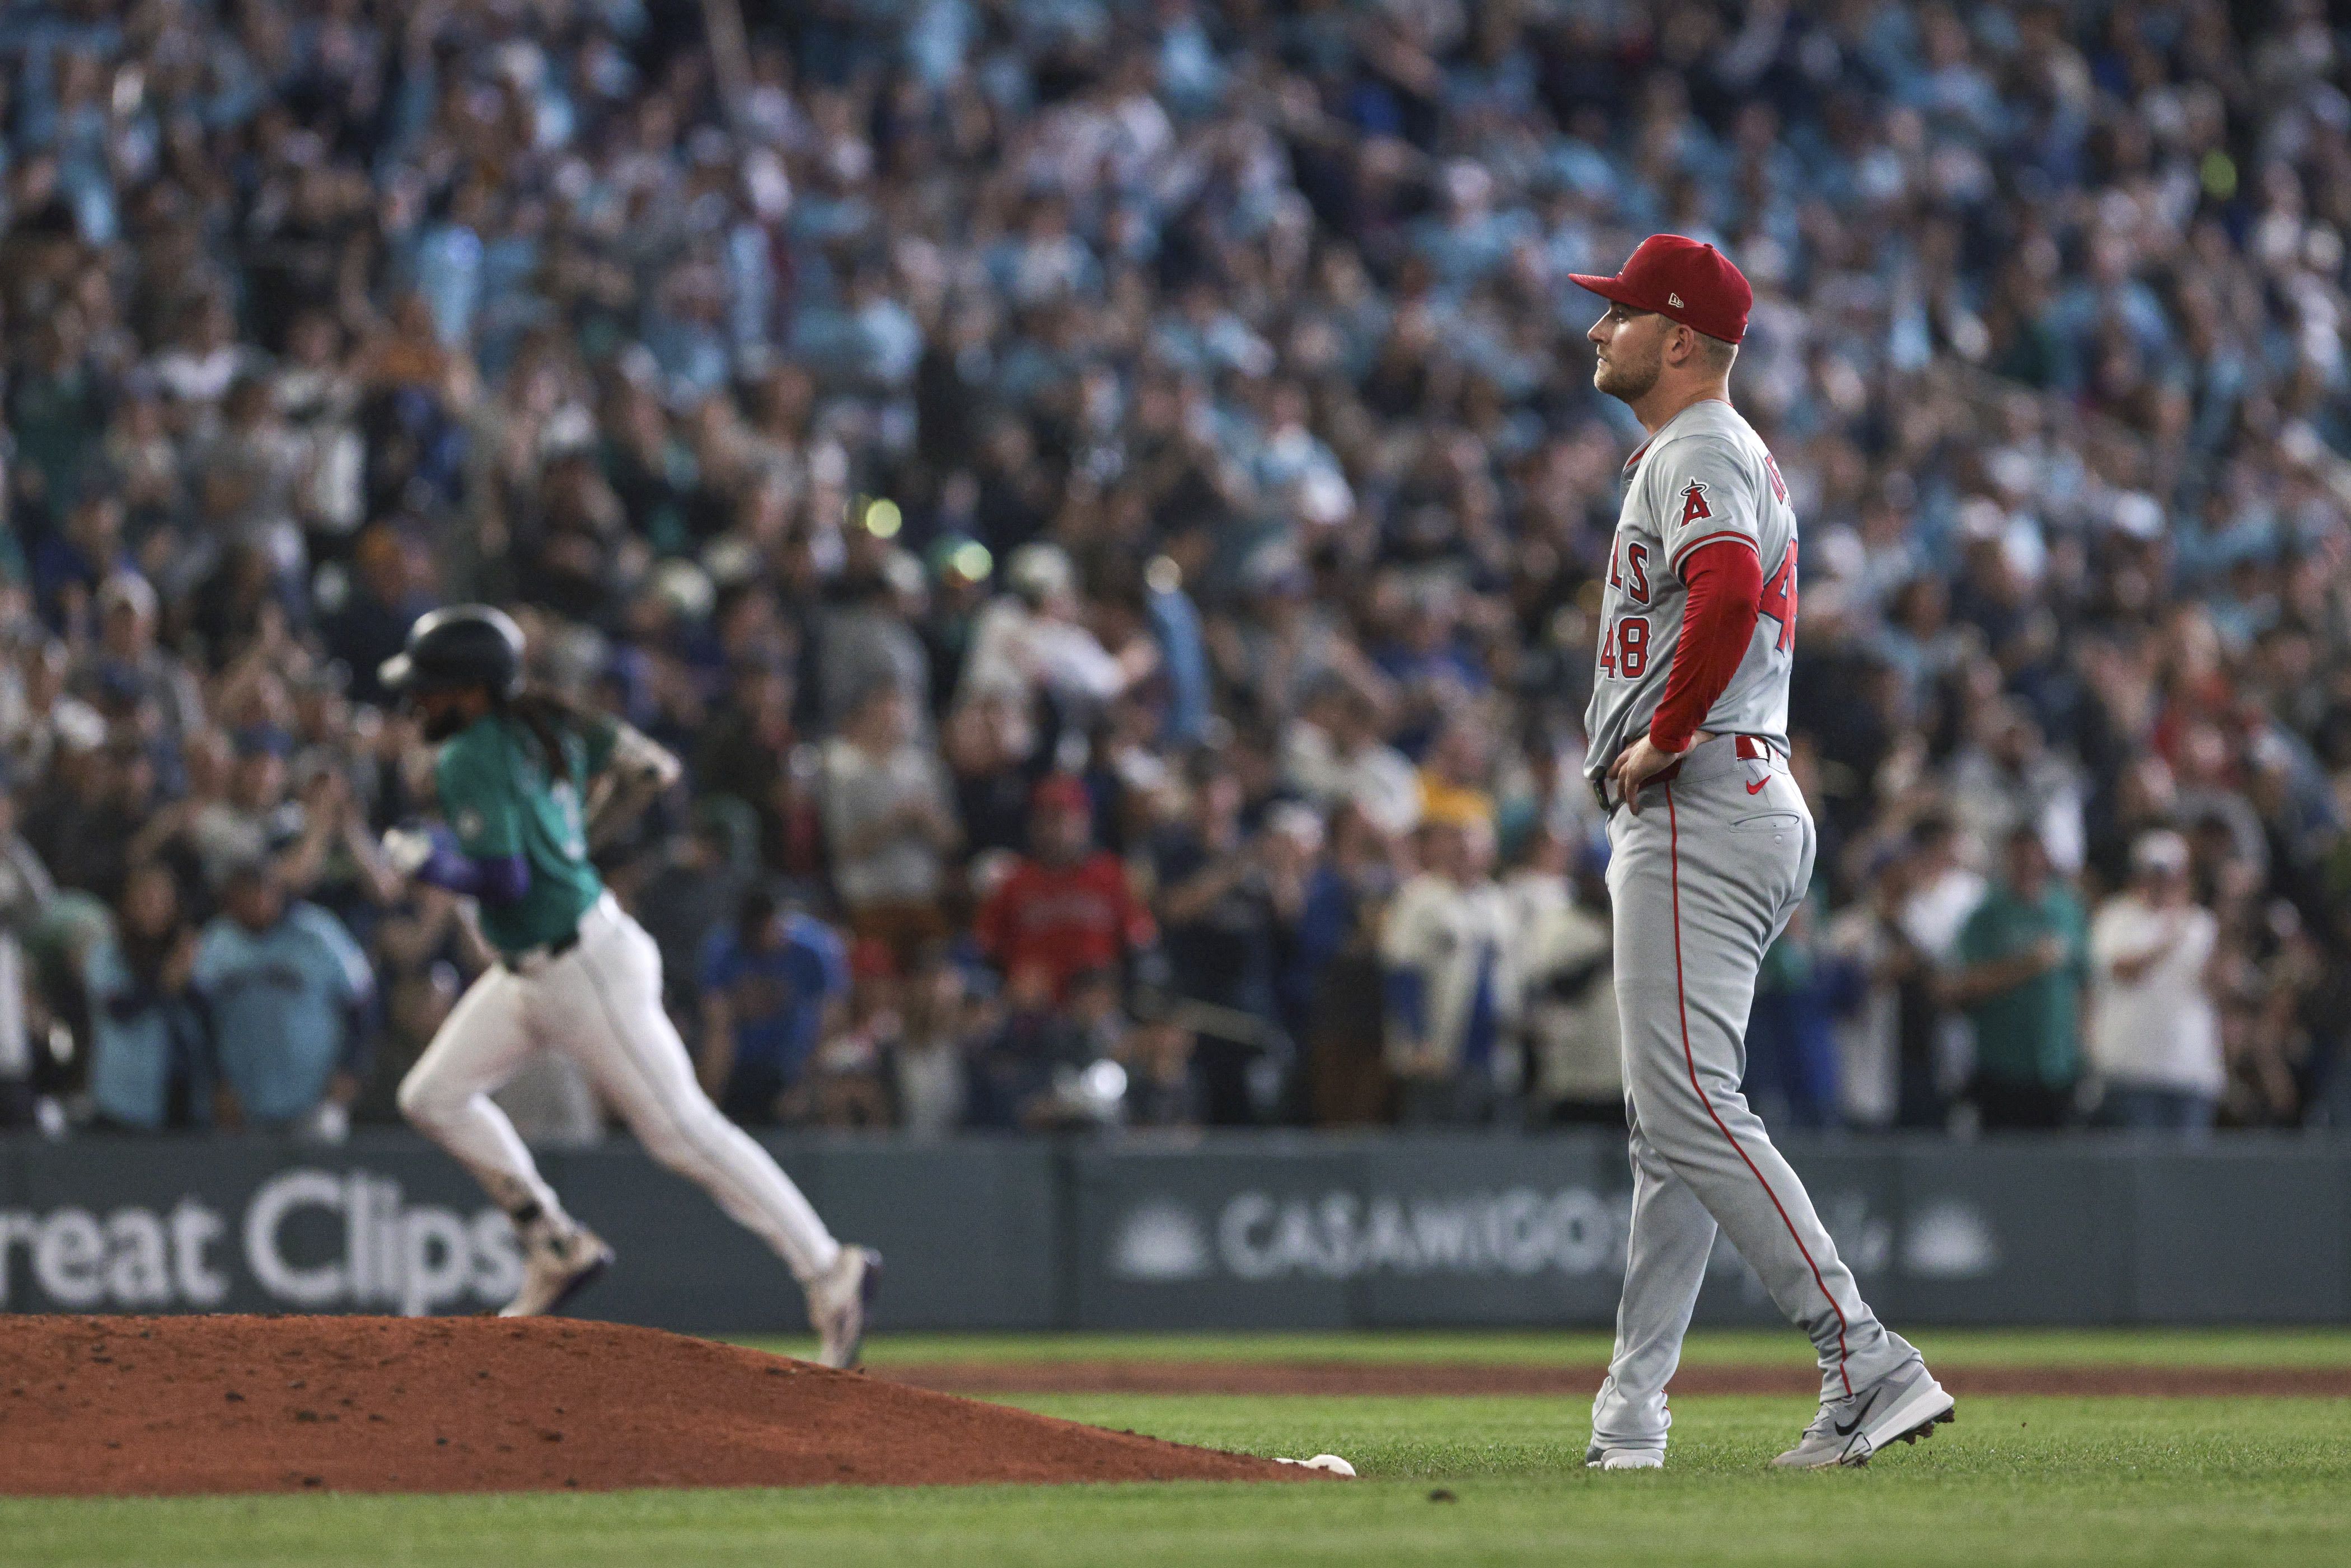 Reid Detmers and Angels can't hold back Mariners in blowout loss